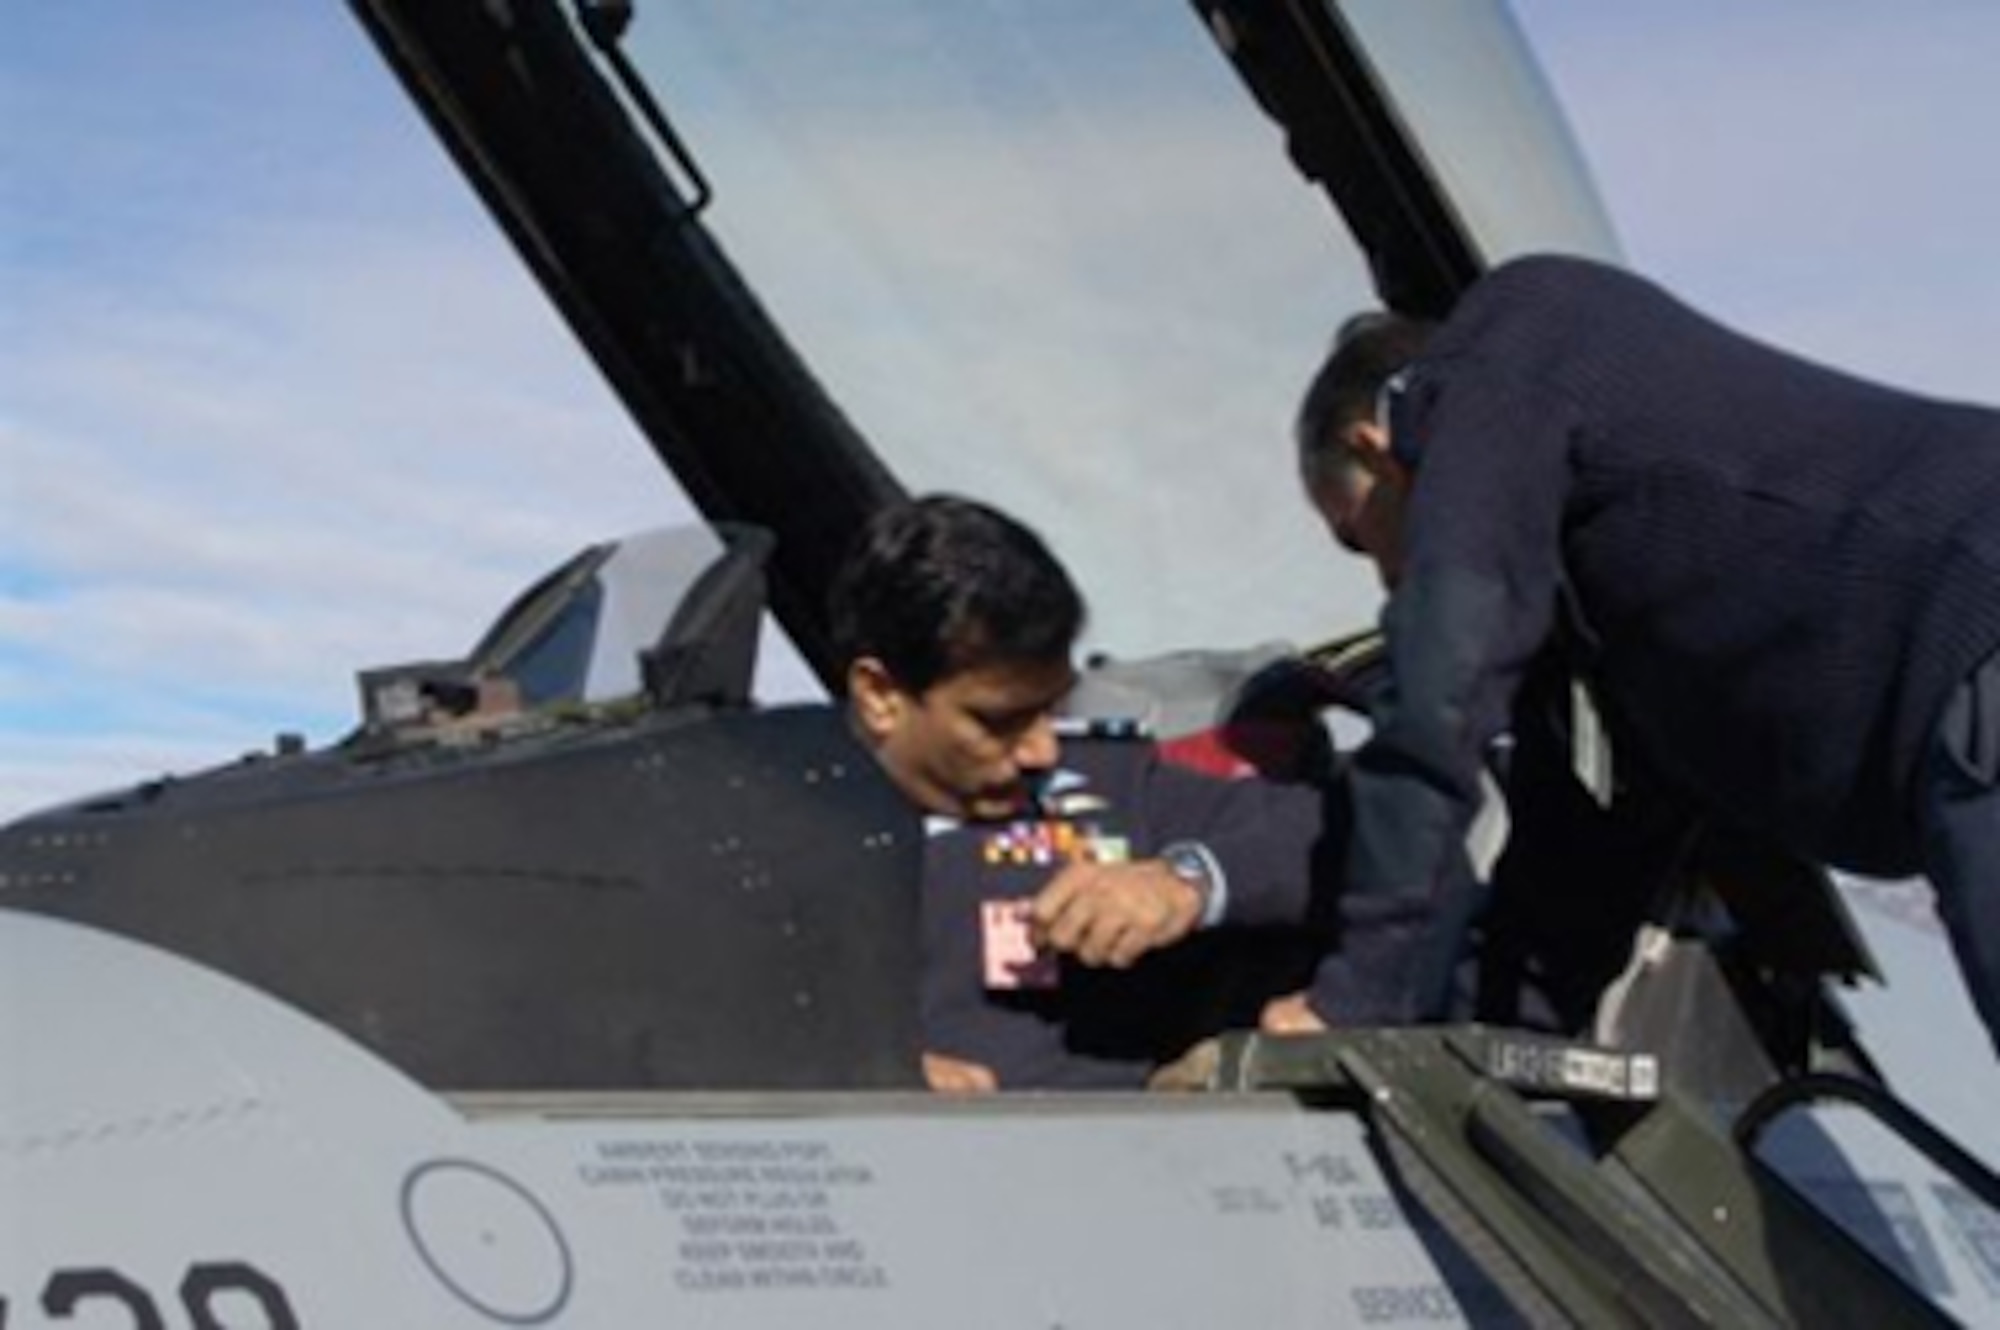 Pakistani Air Commodore (Brig. Gen.) Syed Hassan Raza, Director of F-16 Weapons System Management for F-16 Project Falcon, inspects one of the transfer aircraft at Hill AFB, Utah. (Air Force photo by Dane Anderson)

